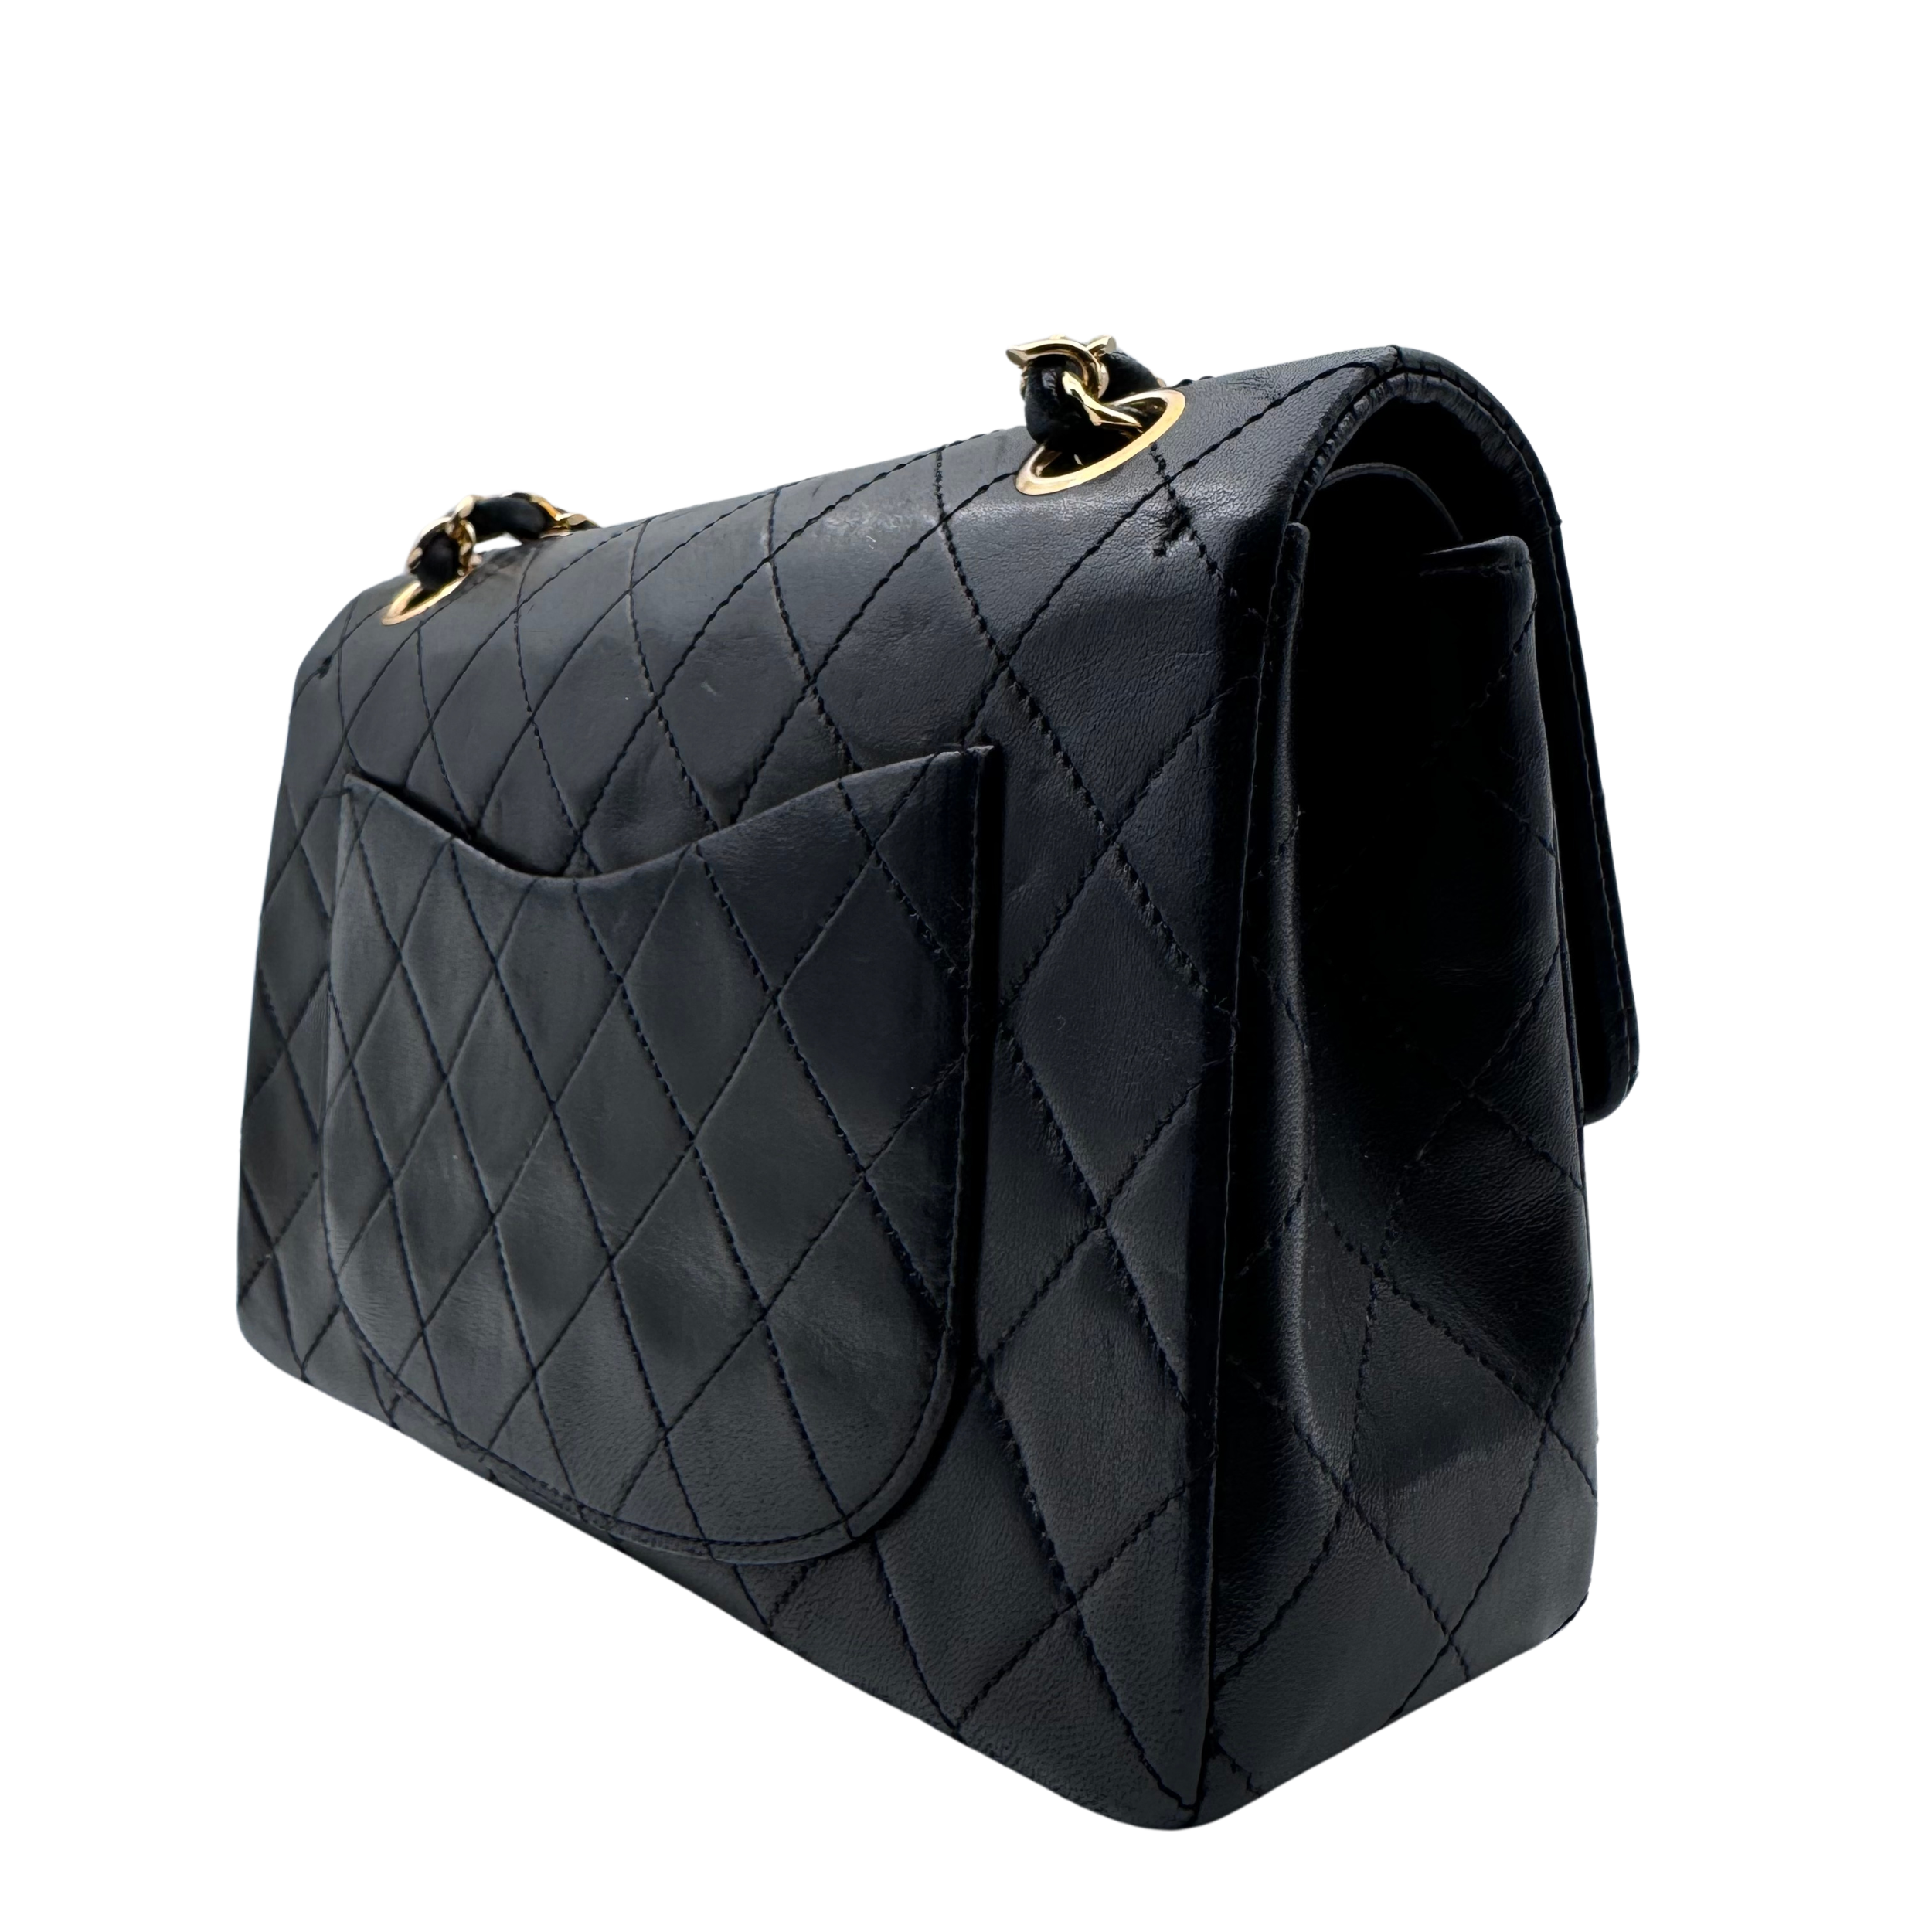 CLASSIC TIMELESS DOUBLE FLAP SMALL - CHANEL Lola Collective